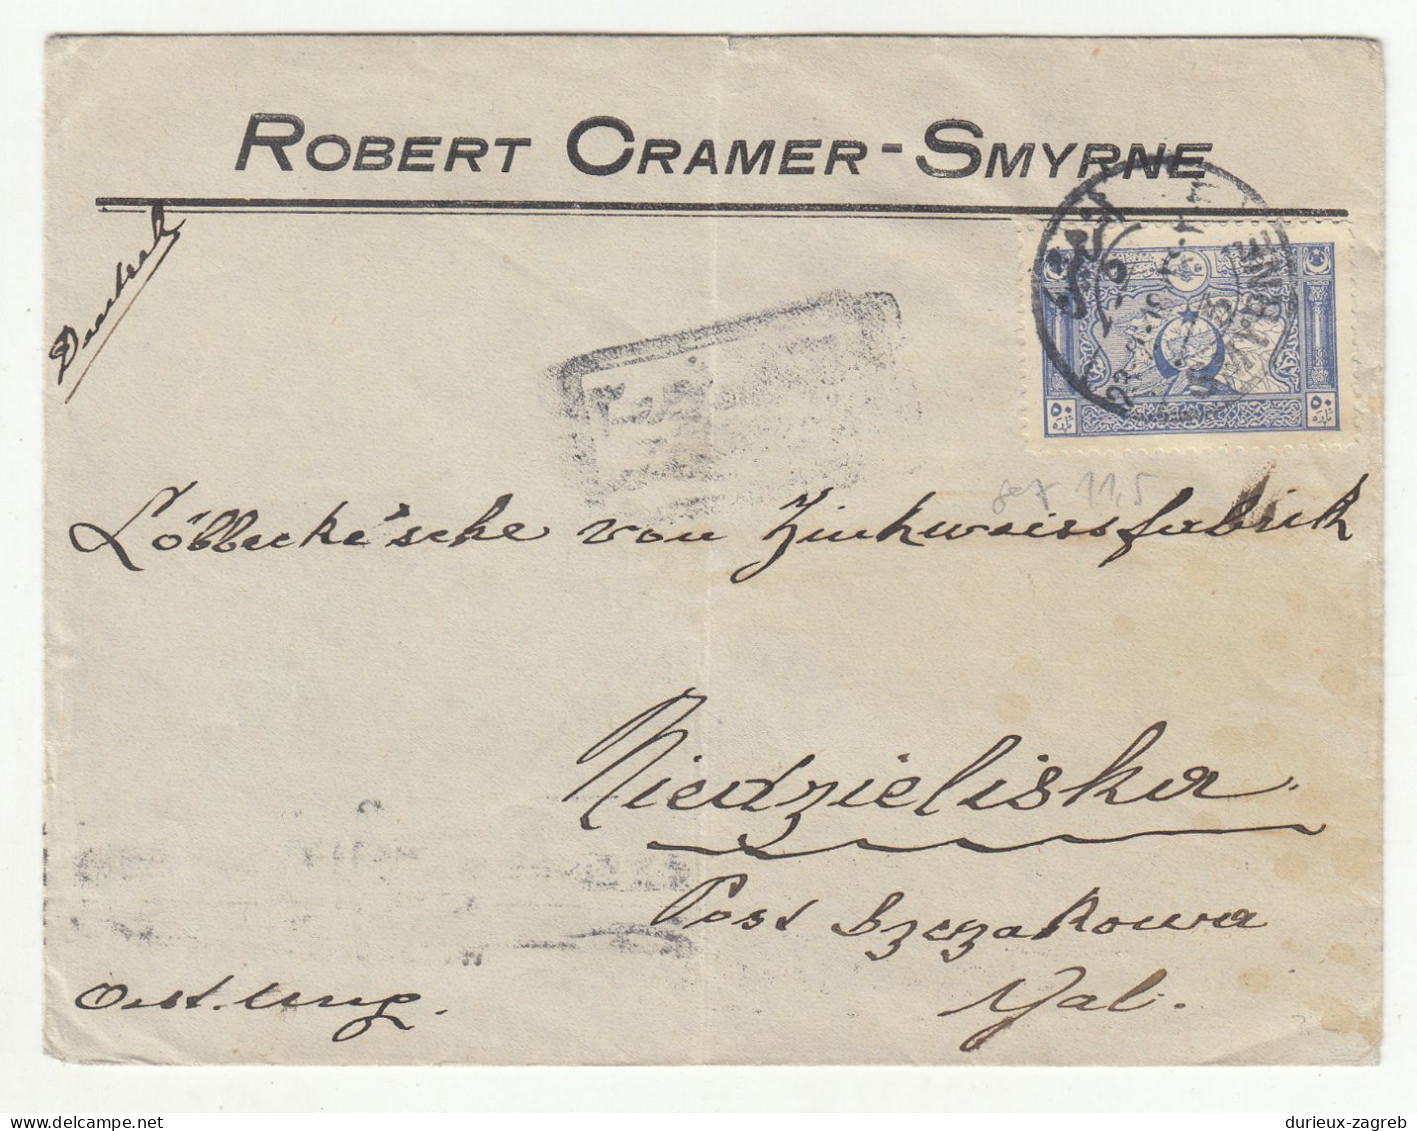 Robert Cramer, Smyrne Company Letter Cover Posted 1918 To Niedzieliska B240401 - Covers & Documents